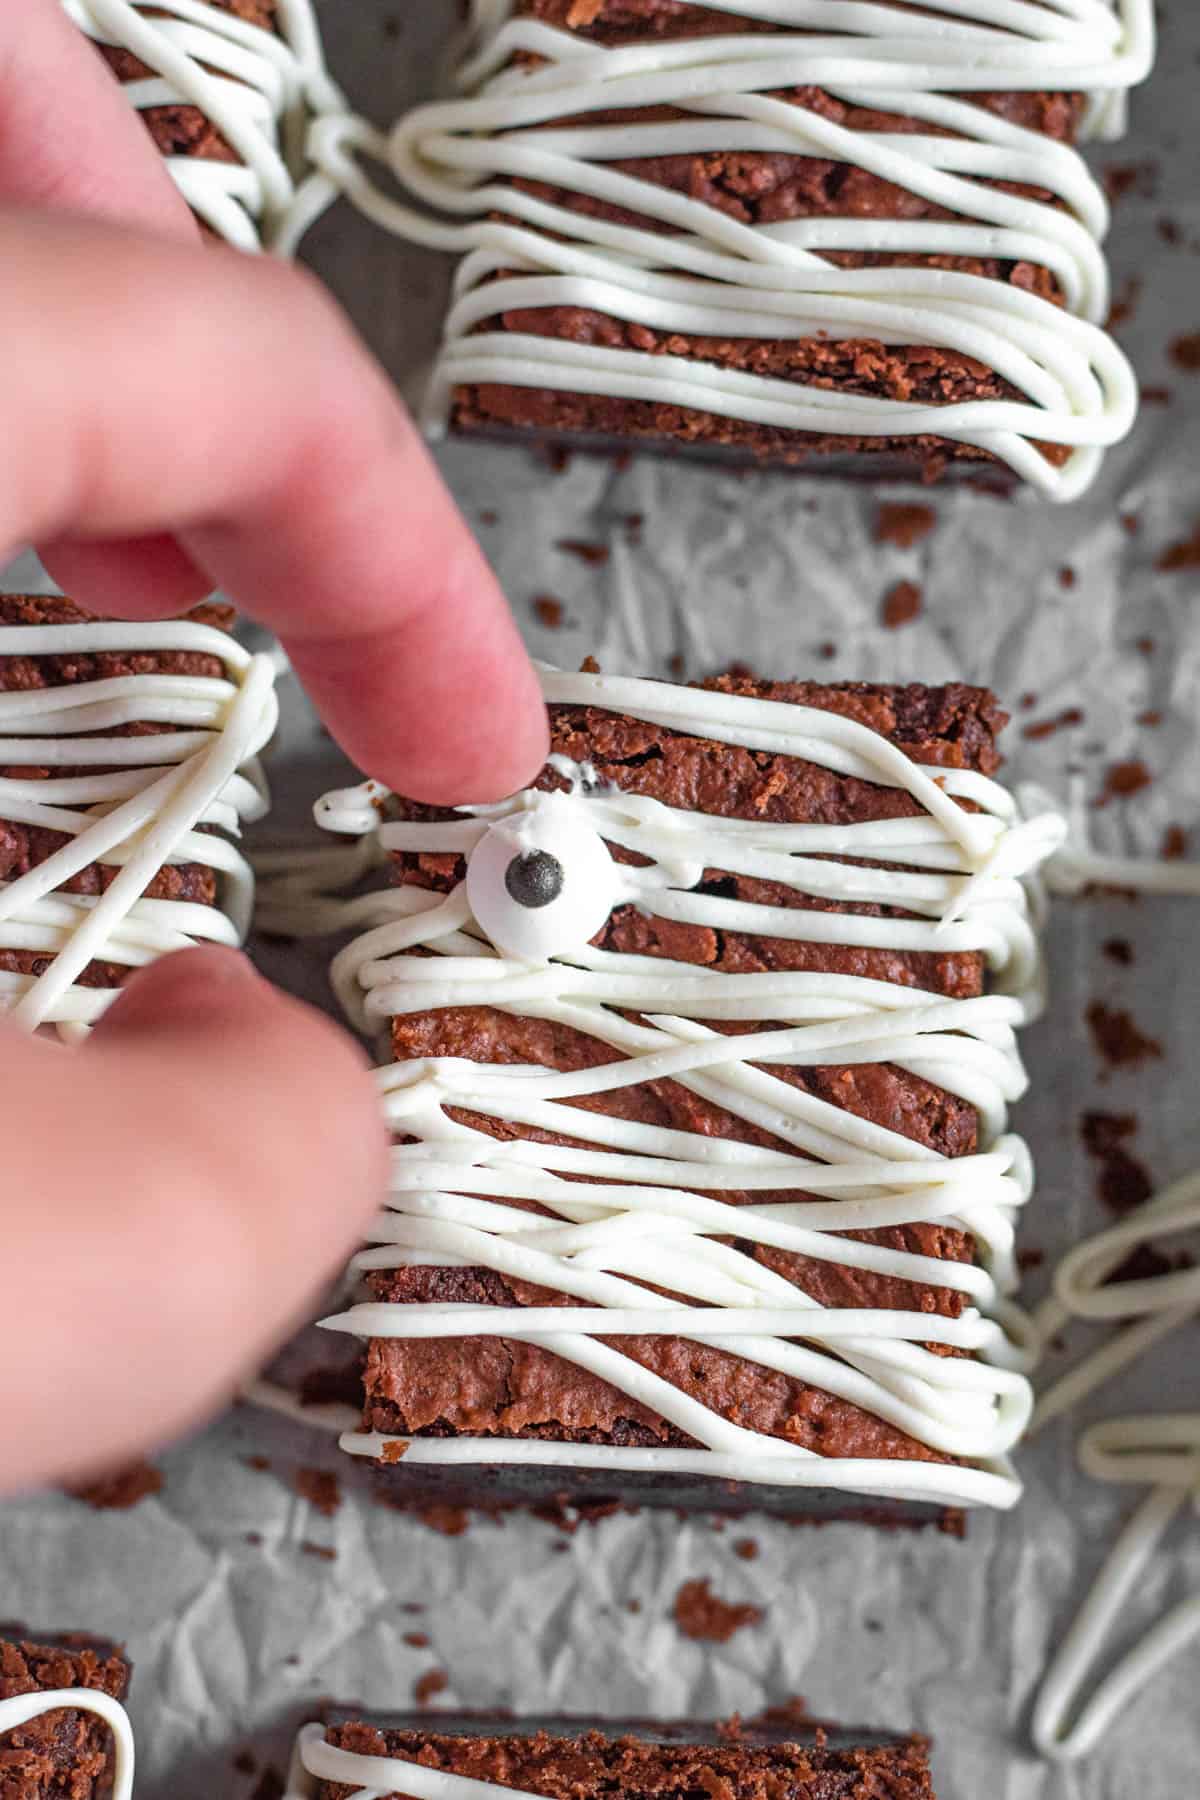 Fingers placing a candy eye on a frosting halloween brownie